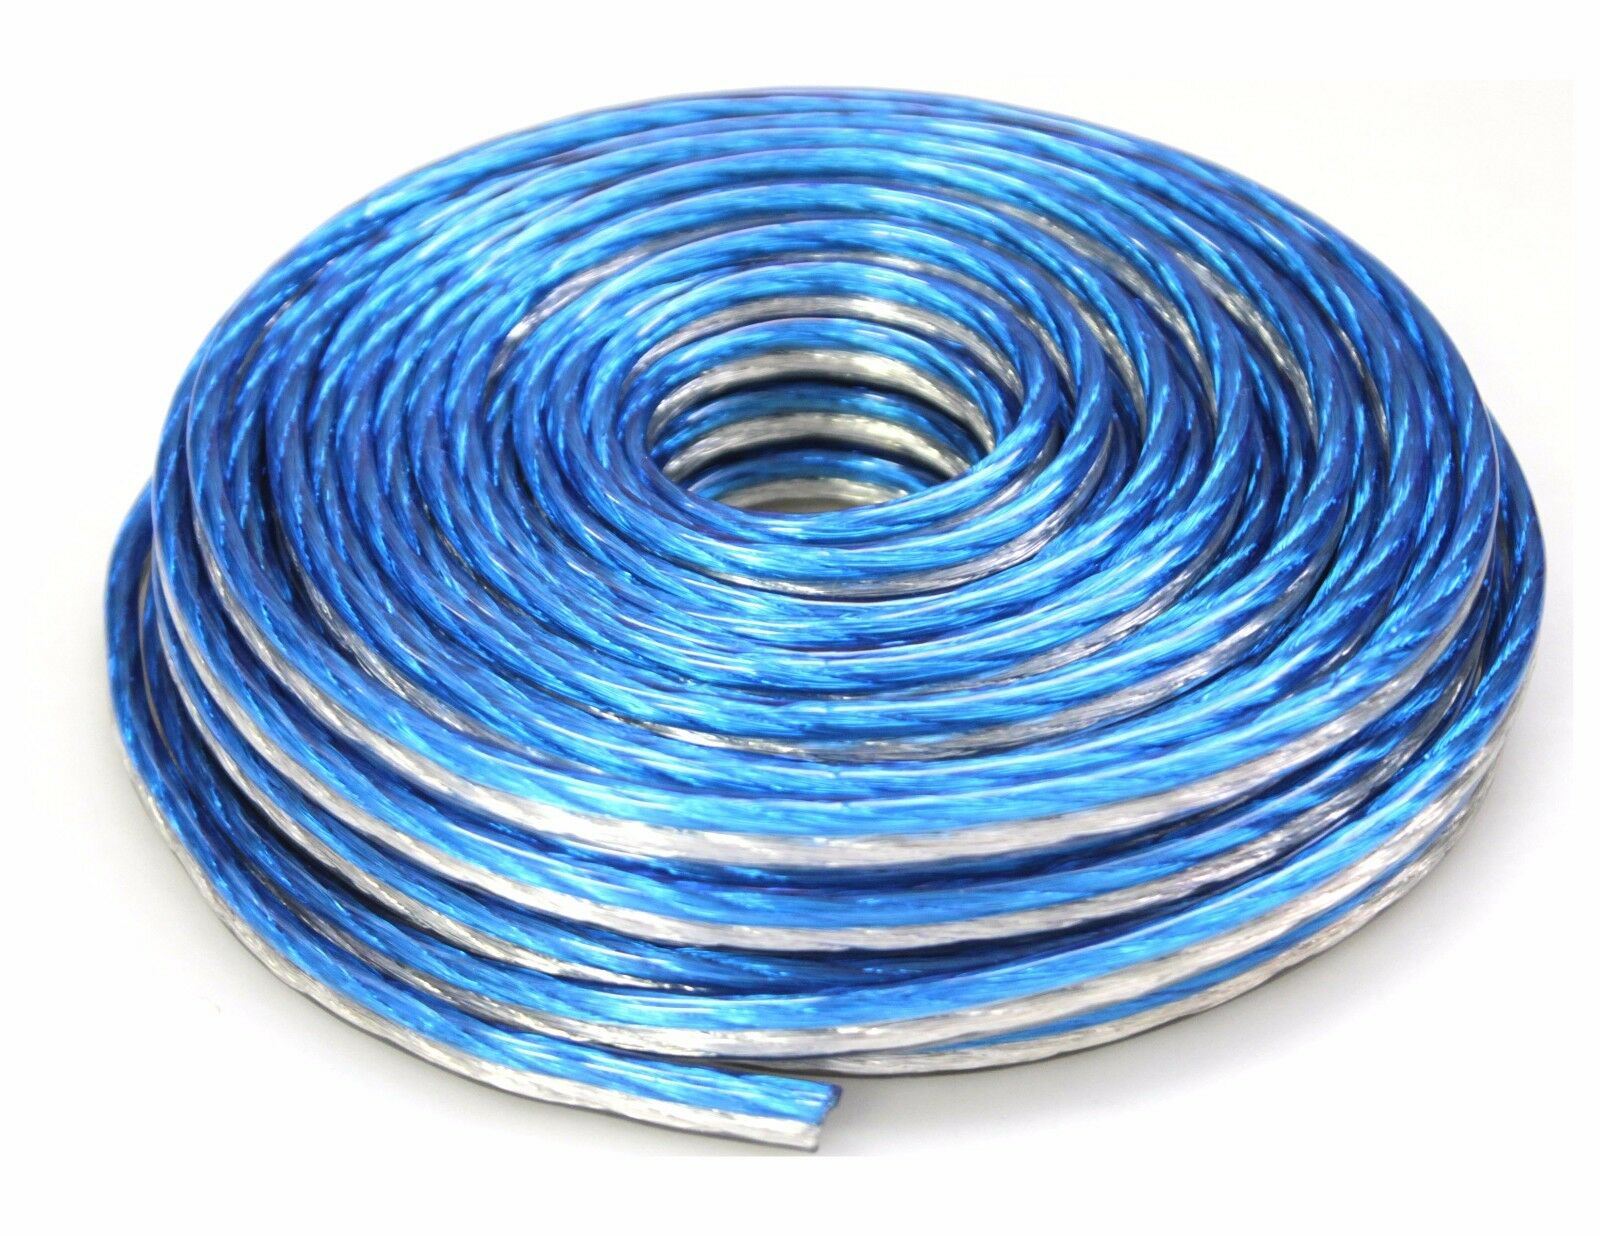 PRO Blue/Silver 25 Ft True 10 Gauge Marine Car, Home Audio Speaker Wire Cable - image 2 of 2